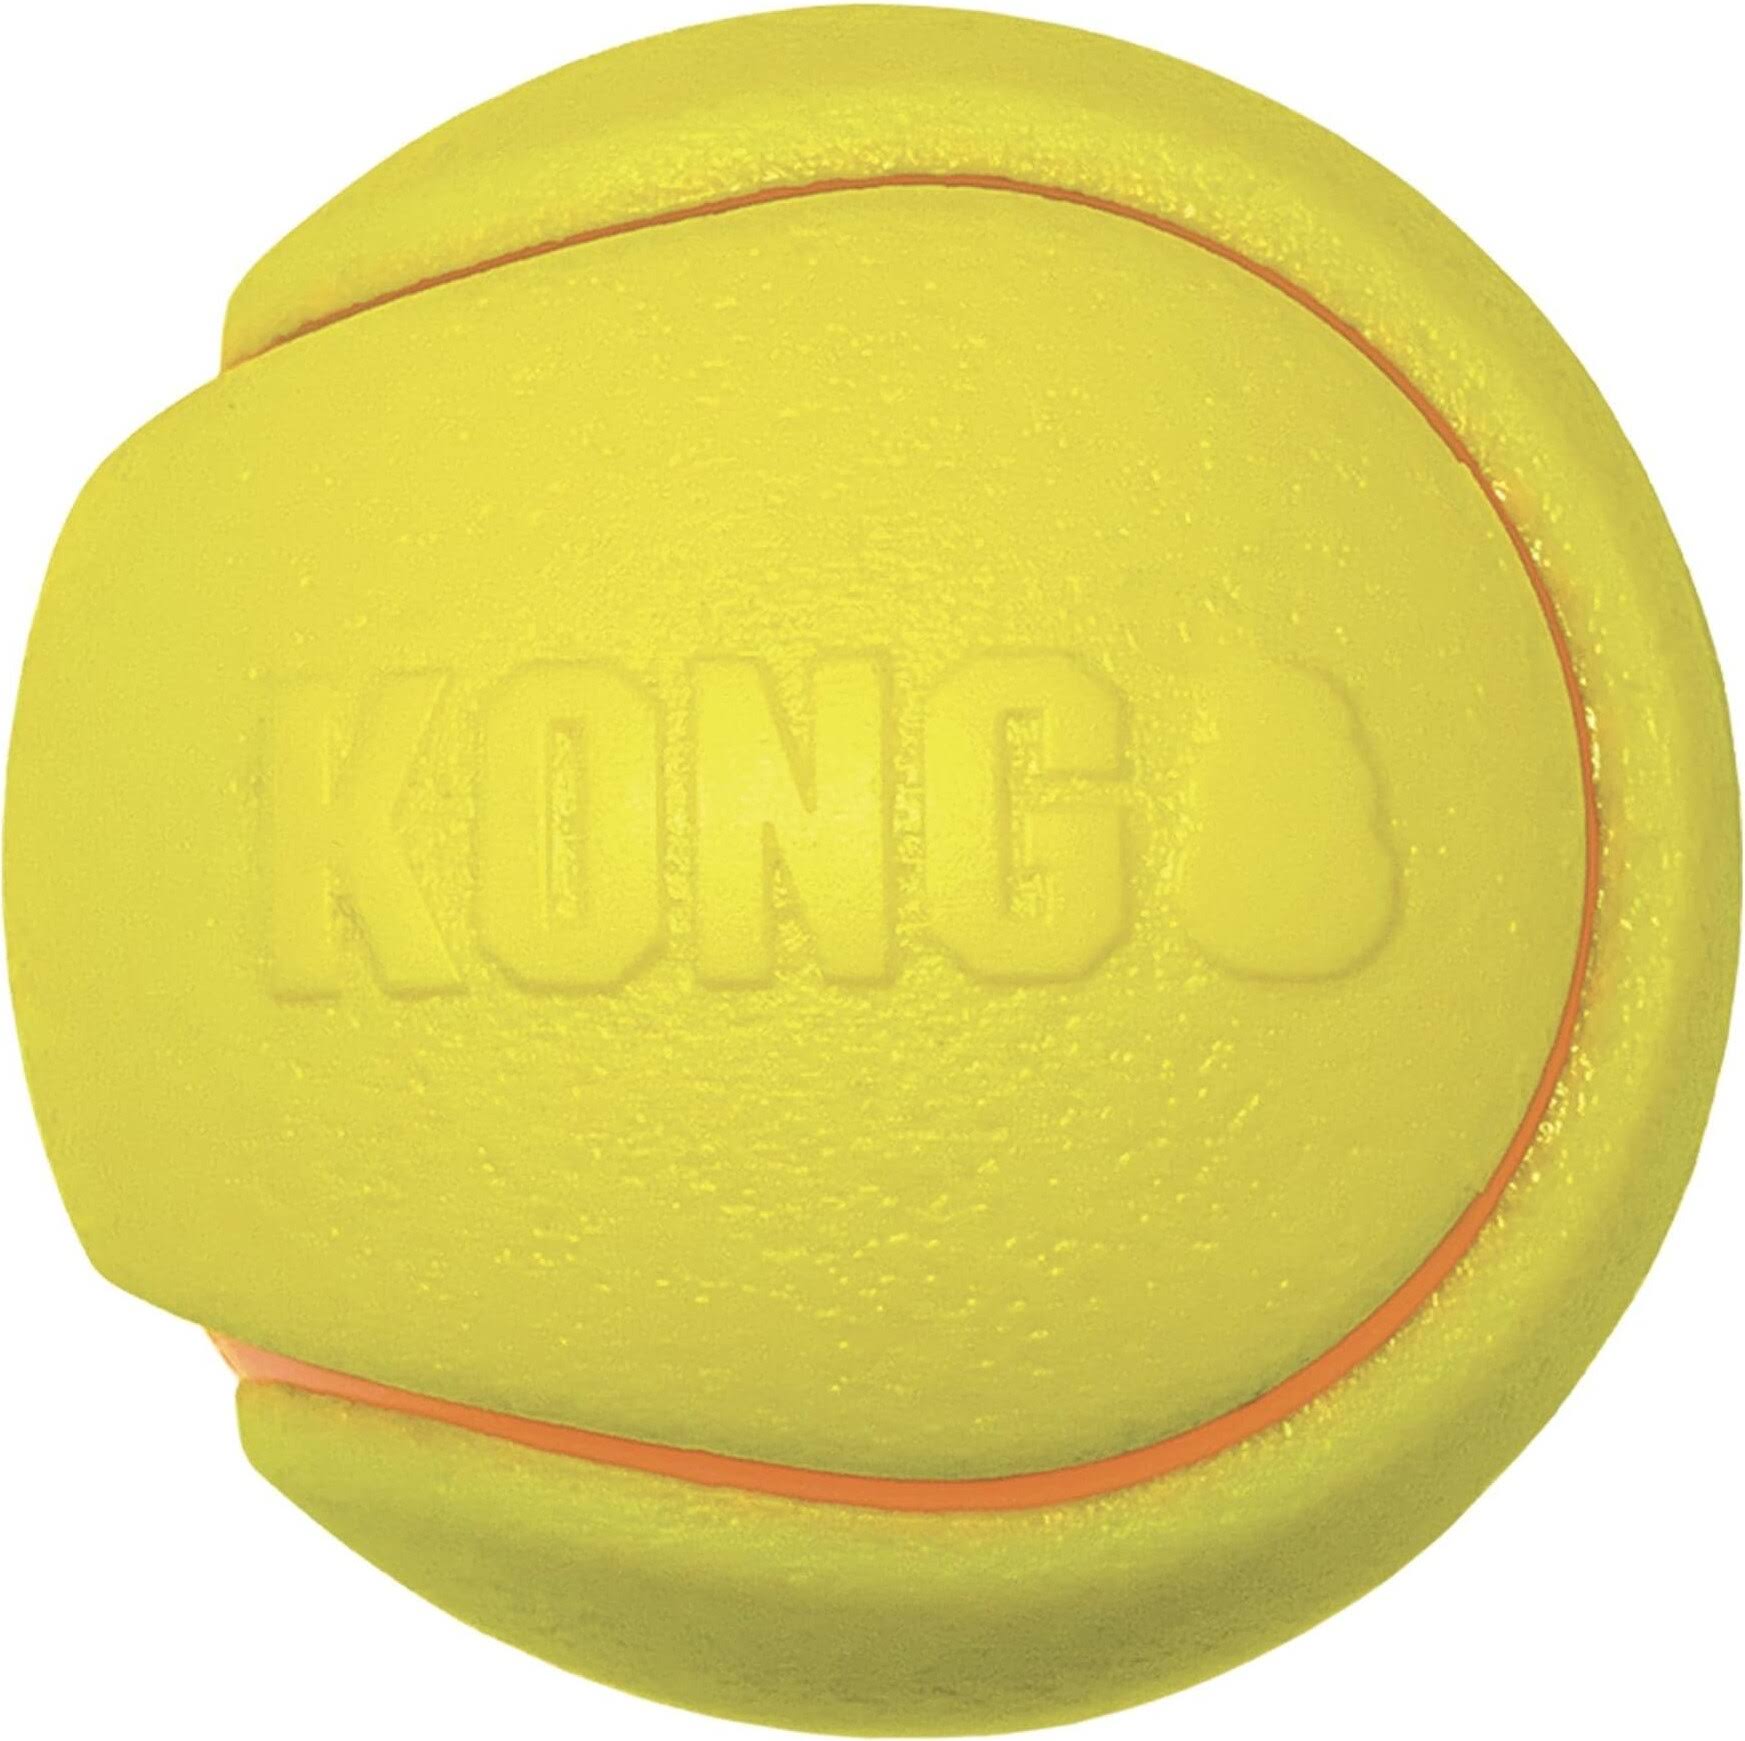 KONG Squeezz Tennis Ball Dog Toy - 2 Pack